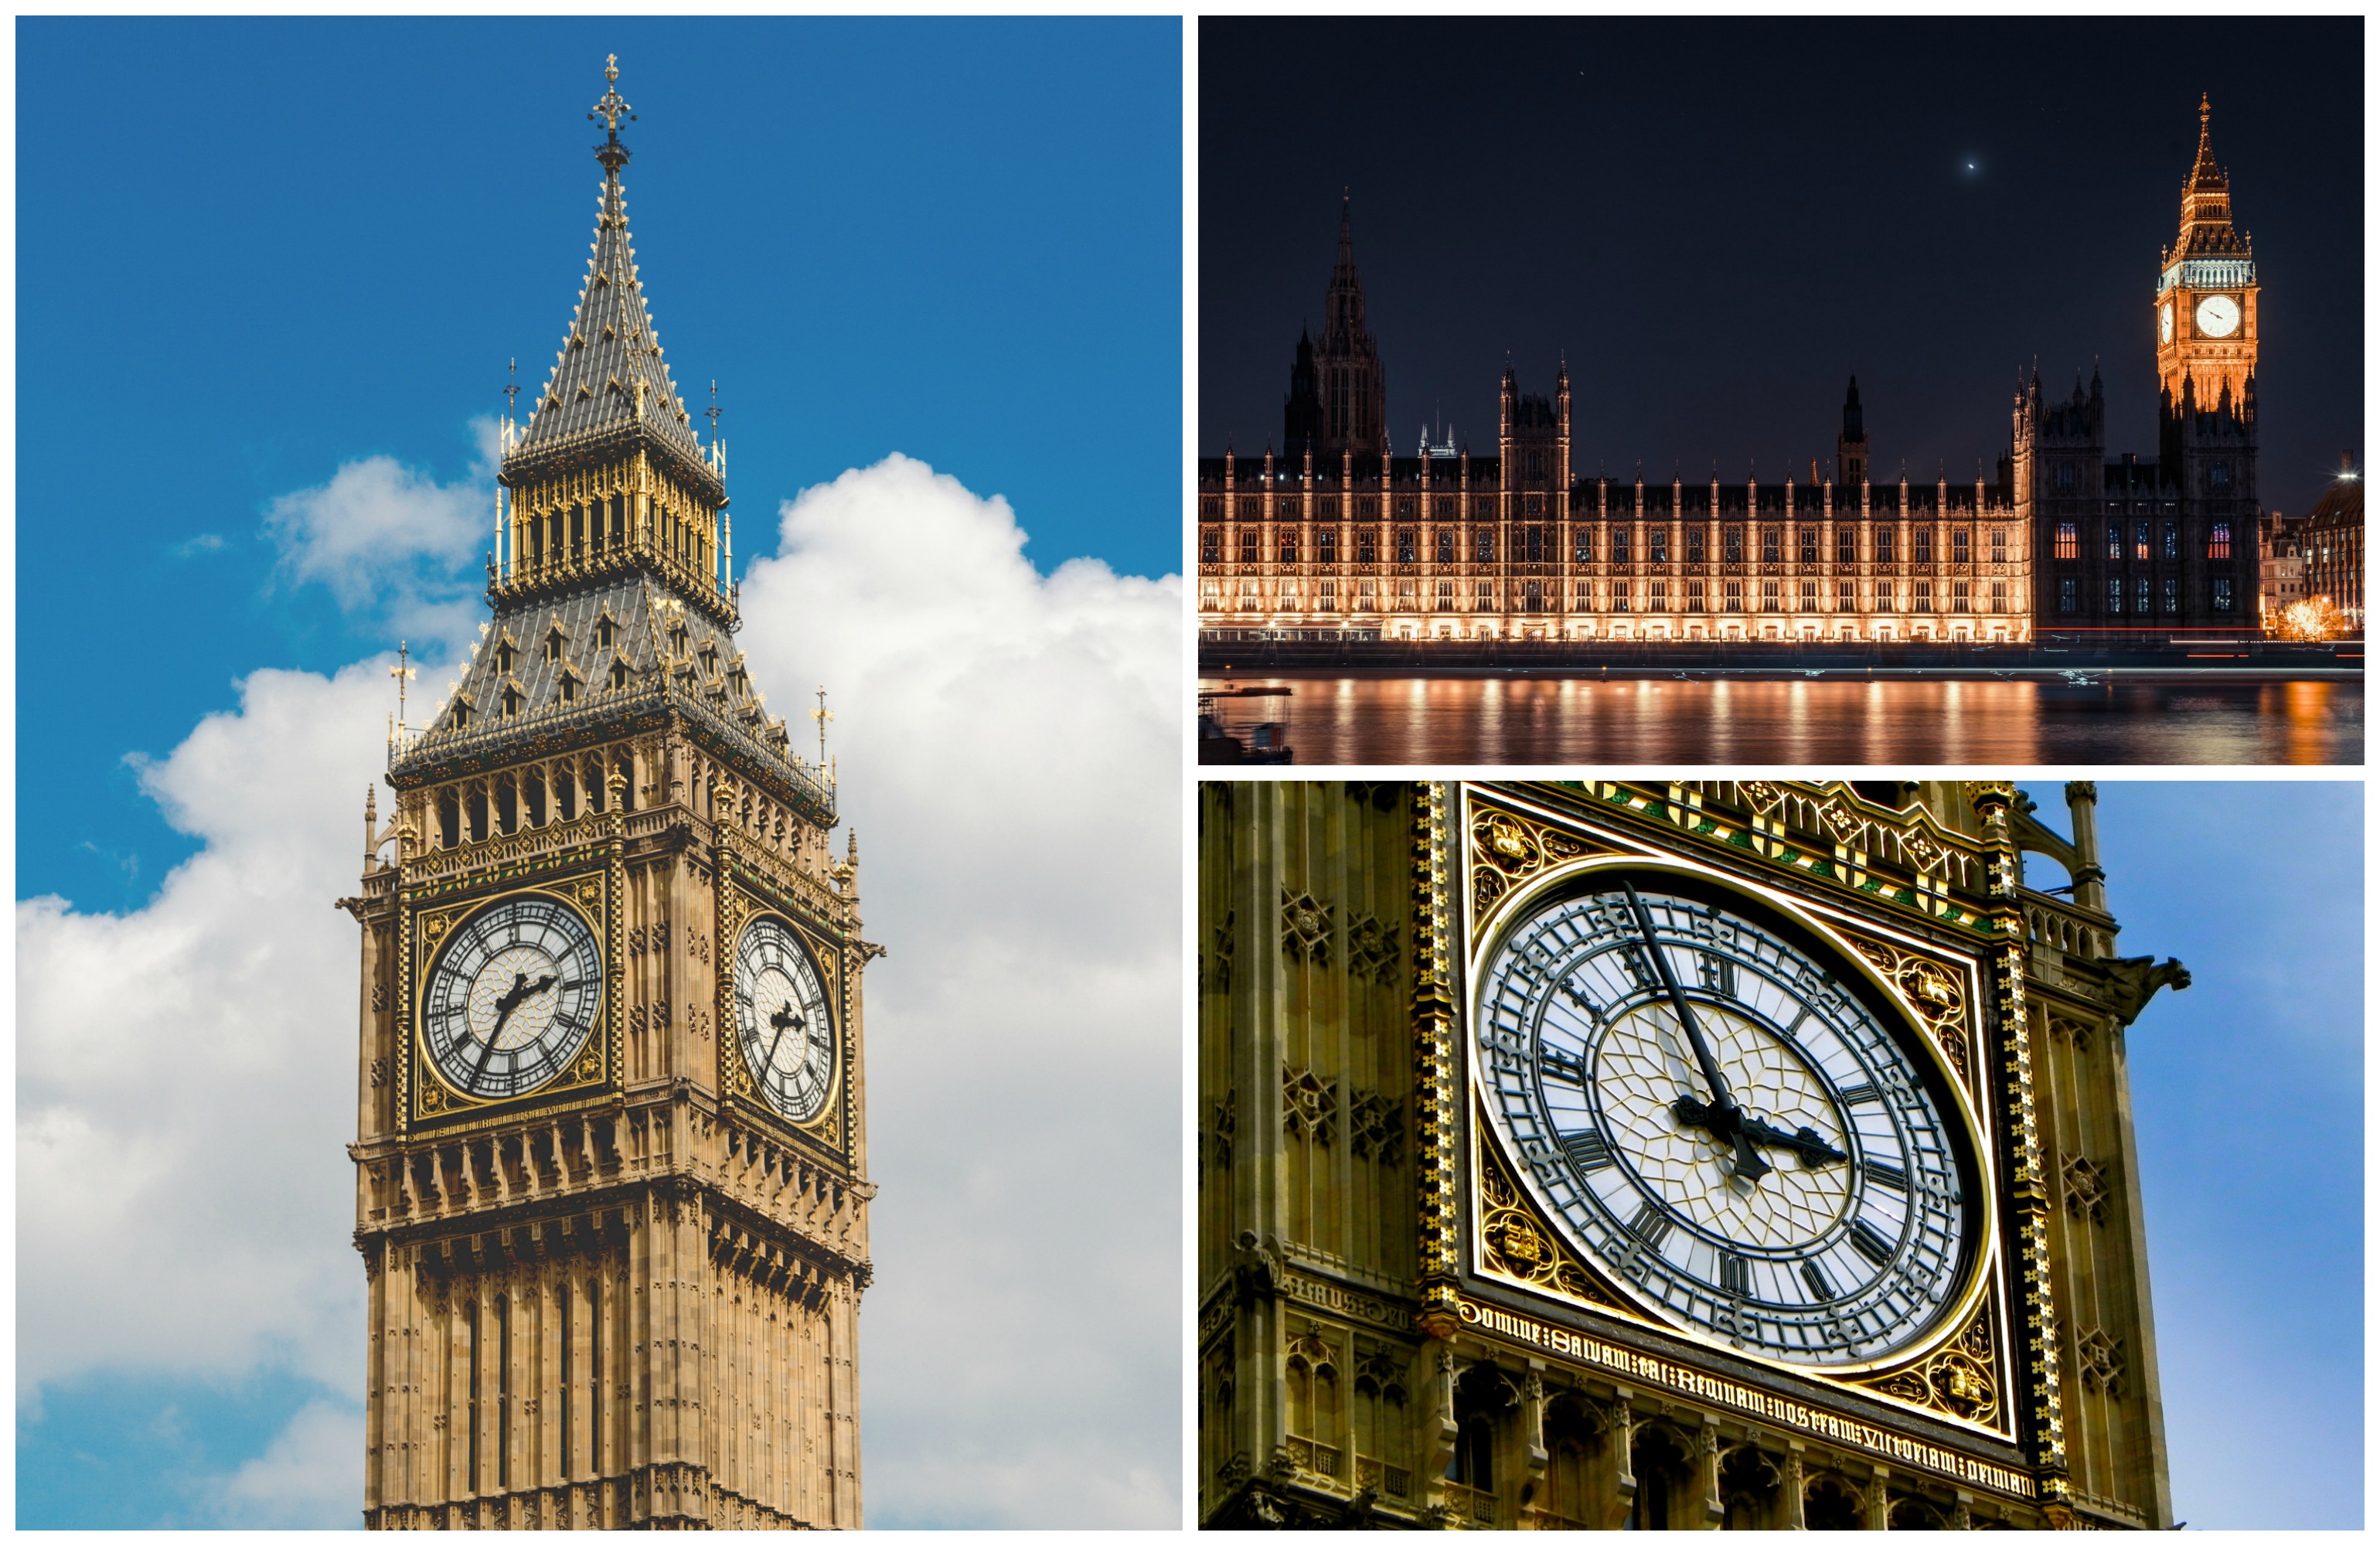 The History Of Big Ben In 1 Minute